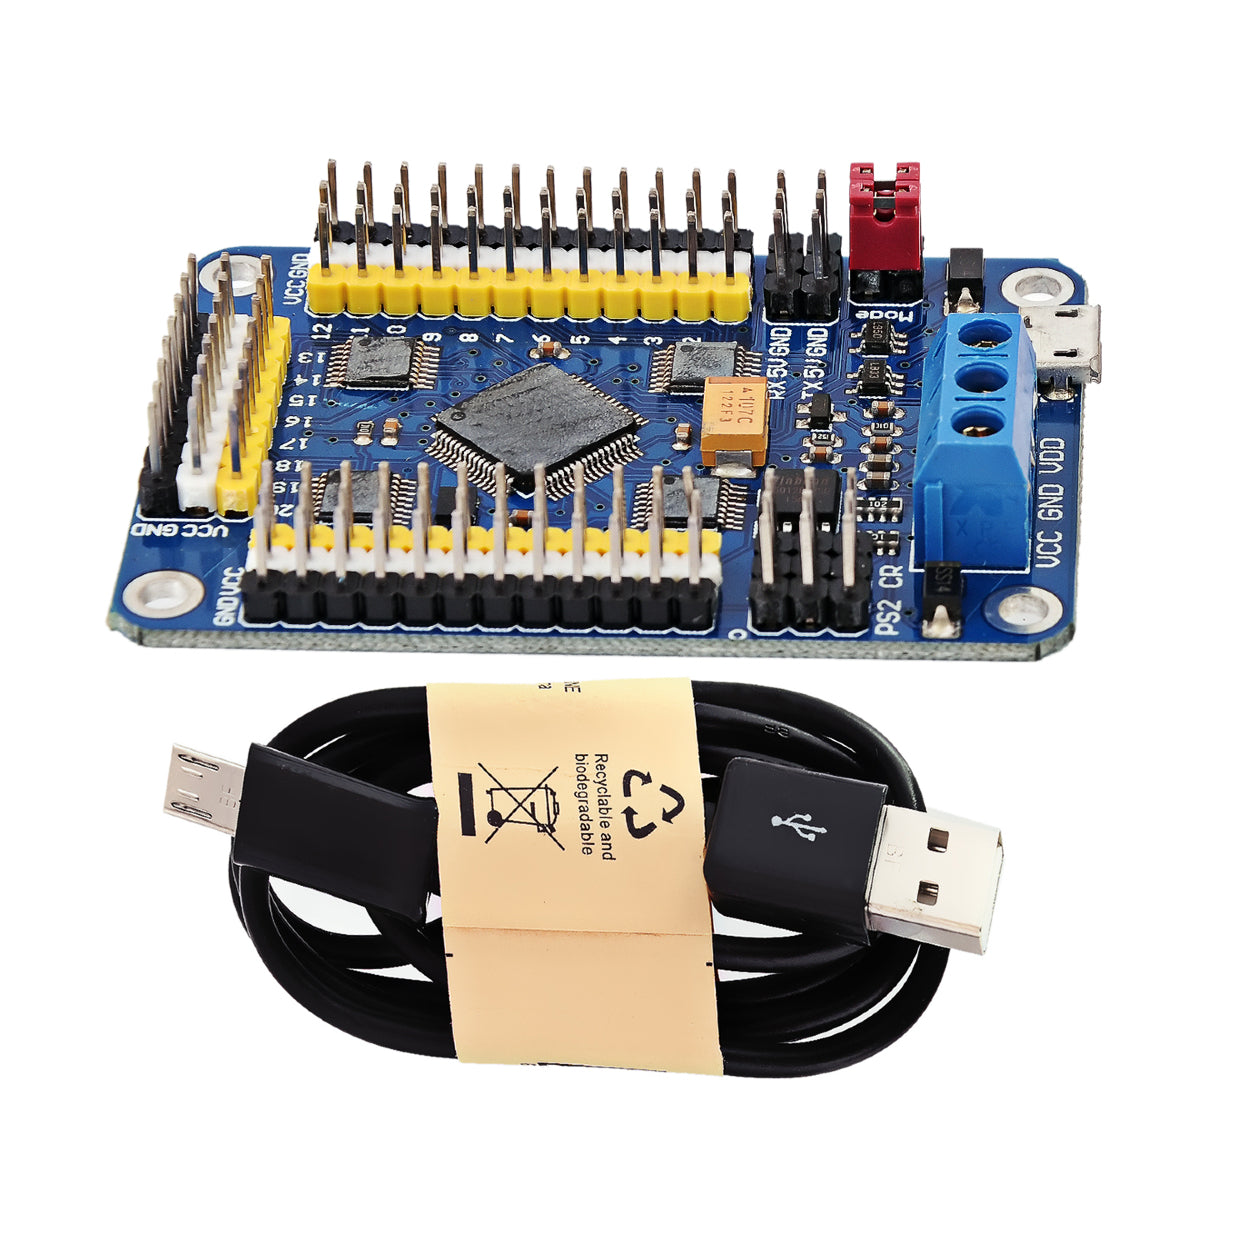 USB 32Ch Servo Motor Controller Board, support PS2 WIFI with USB Cable